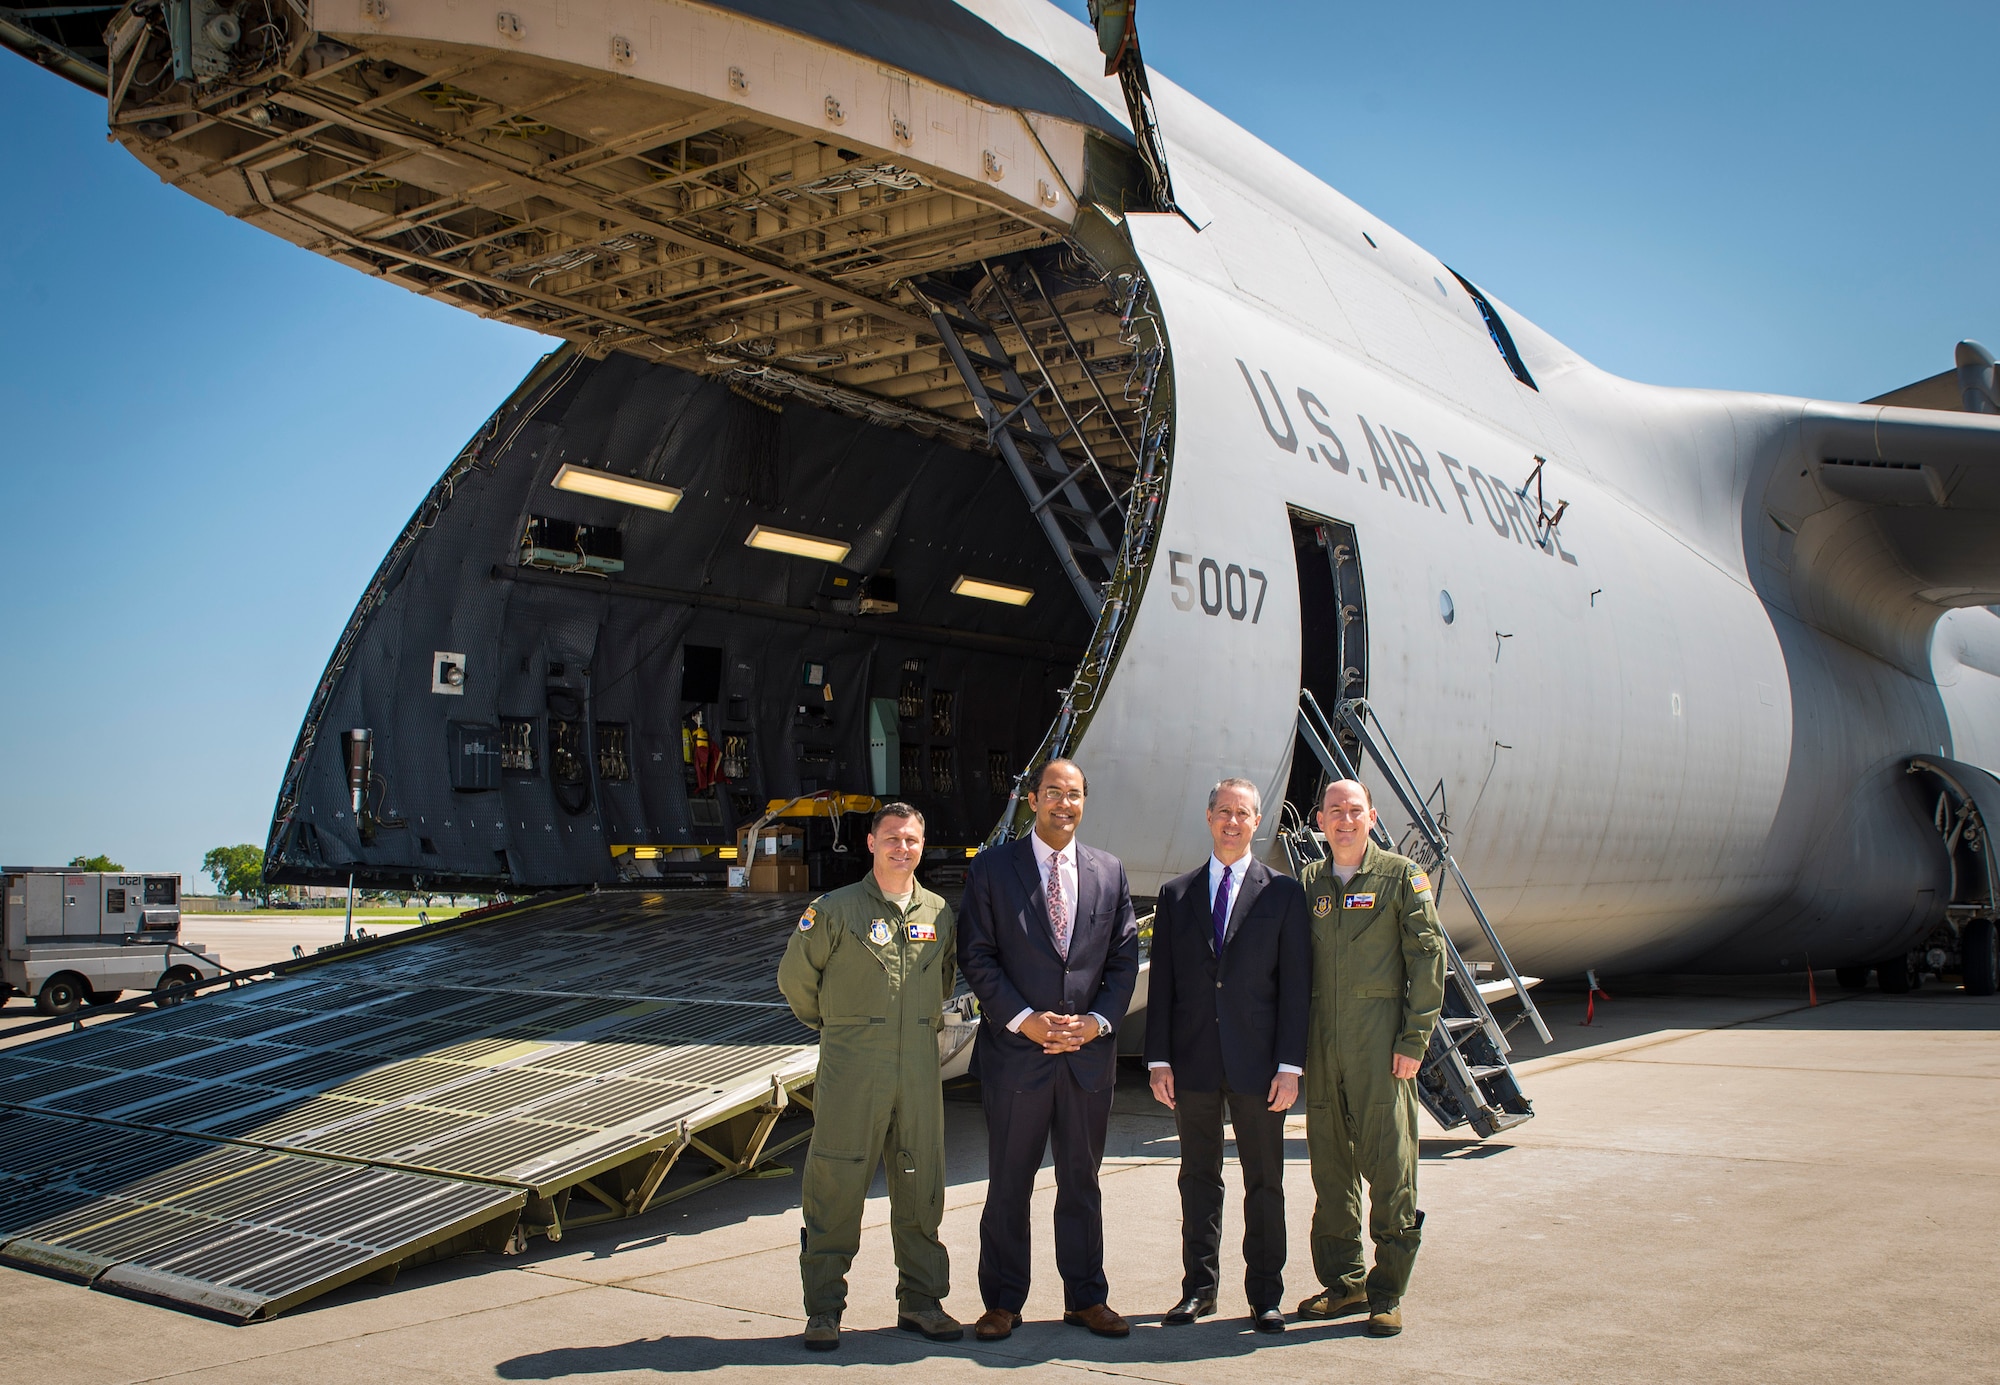 From left: Col. Lee Merkle, 433rd Operations Group commander, U.S. Rep. William Hurd, 23rd District of Texas, U.S. Rep. Mac Thornberry, 13th District of Texas, and Col. Thomas Smith, 433rd Airlift Wing commander, pose in front of a C-5M Super Galaxy aircraft May 3, 2016 at Joint Base San Antonio-Lackland, Texas. The congressmen recieved a mission brief and toured a C-5 during their visit to the base. (U.S. Air Force photo by Benjamin Faske) (released)